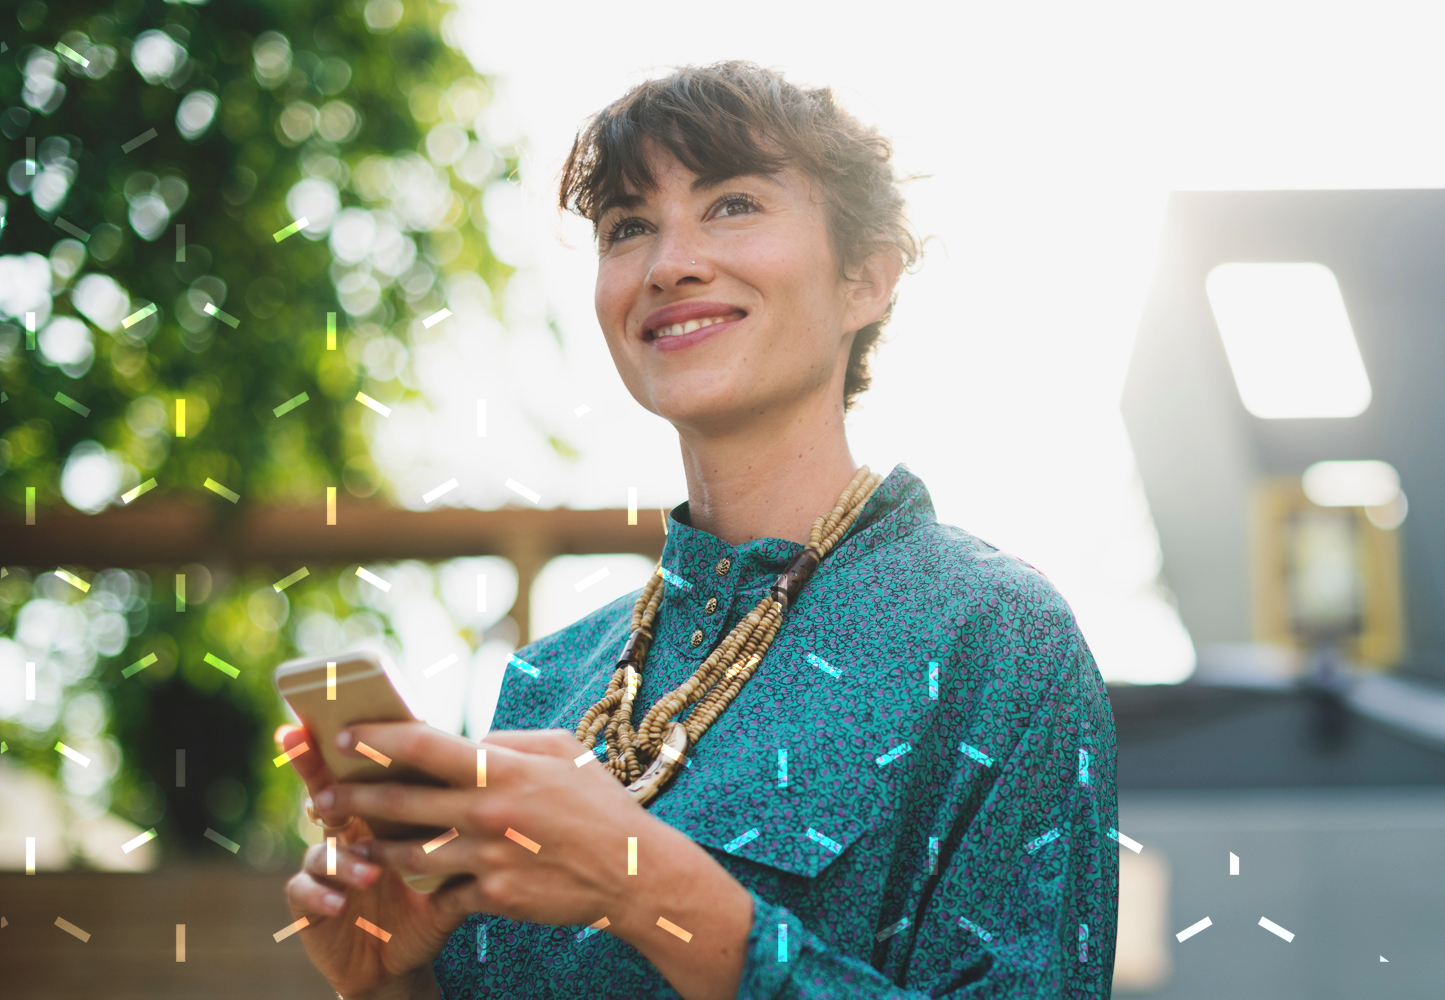 A woman looks up and smiles while holding a smartphone.